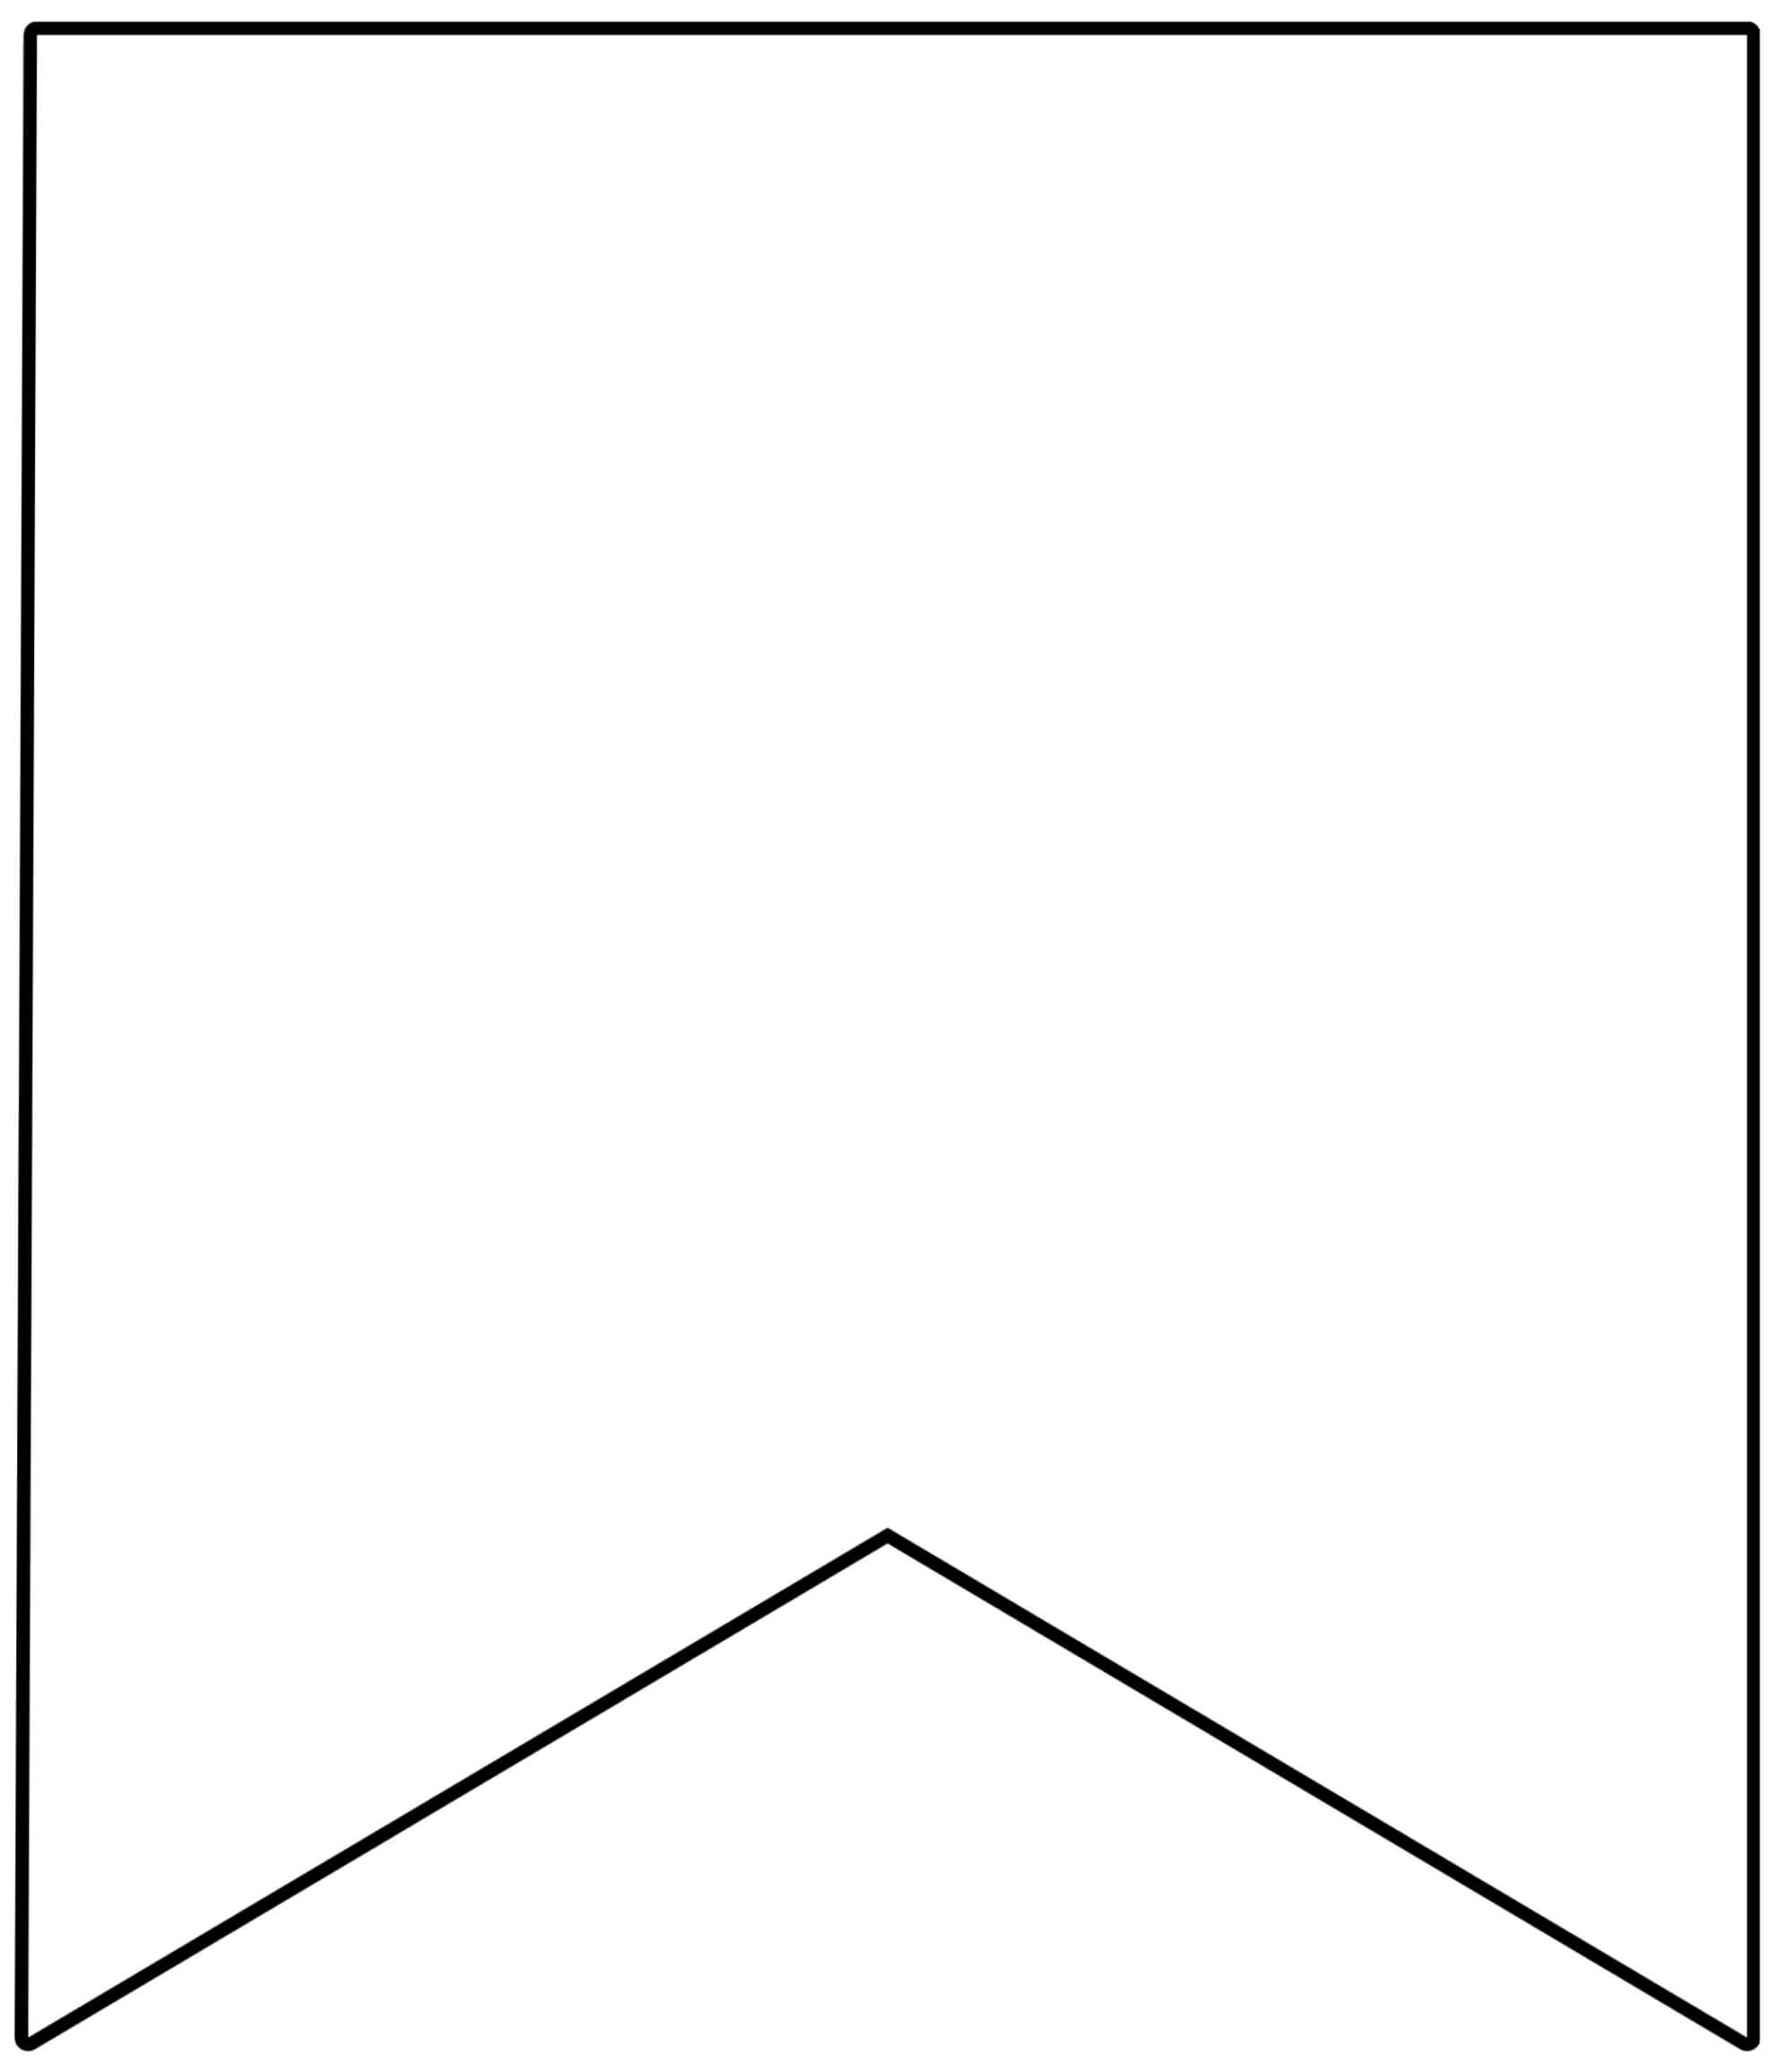 Free Printable Banner Templates {Blank Banners} Paper inside Triangle